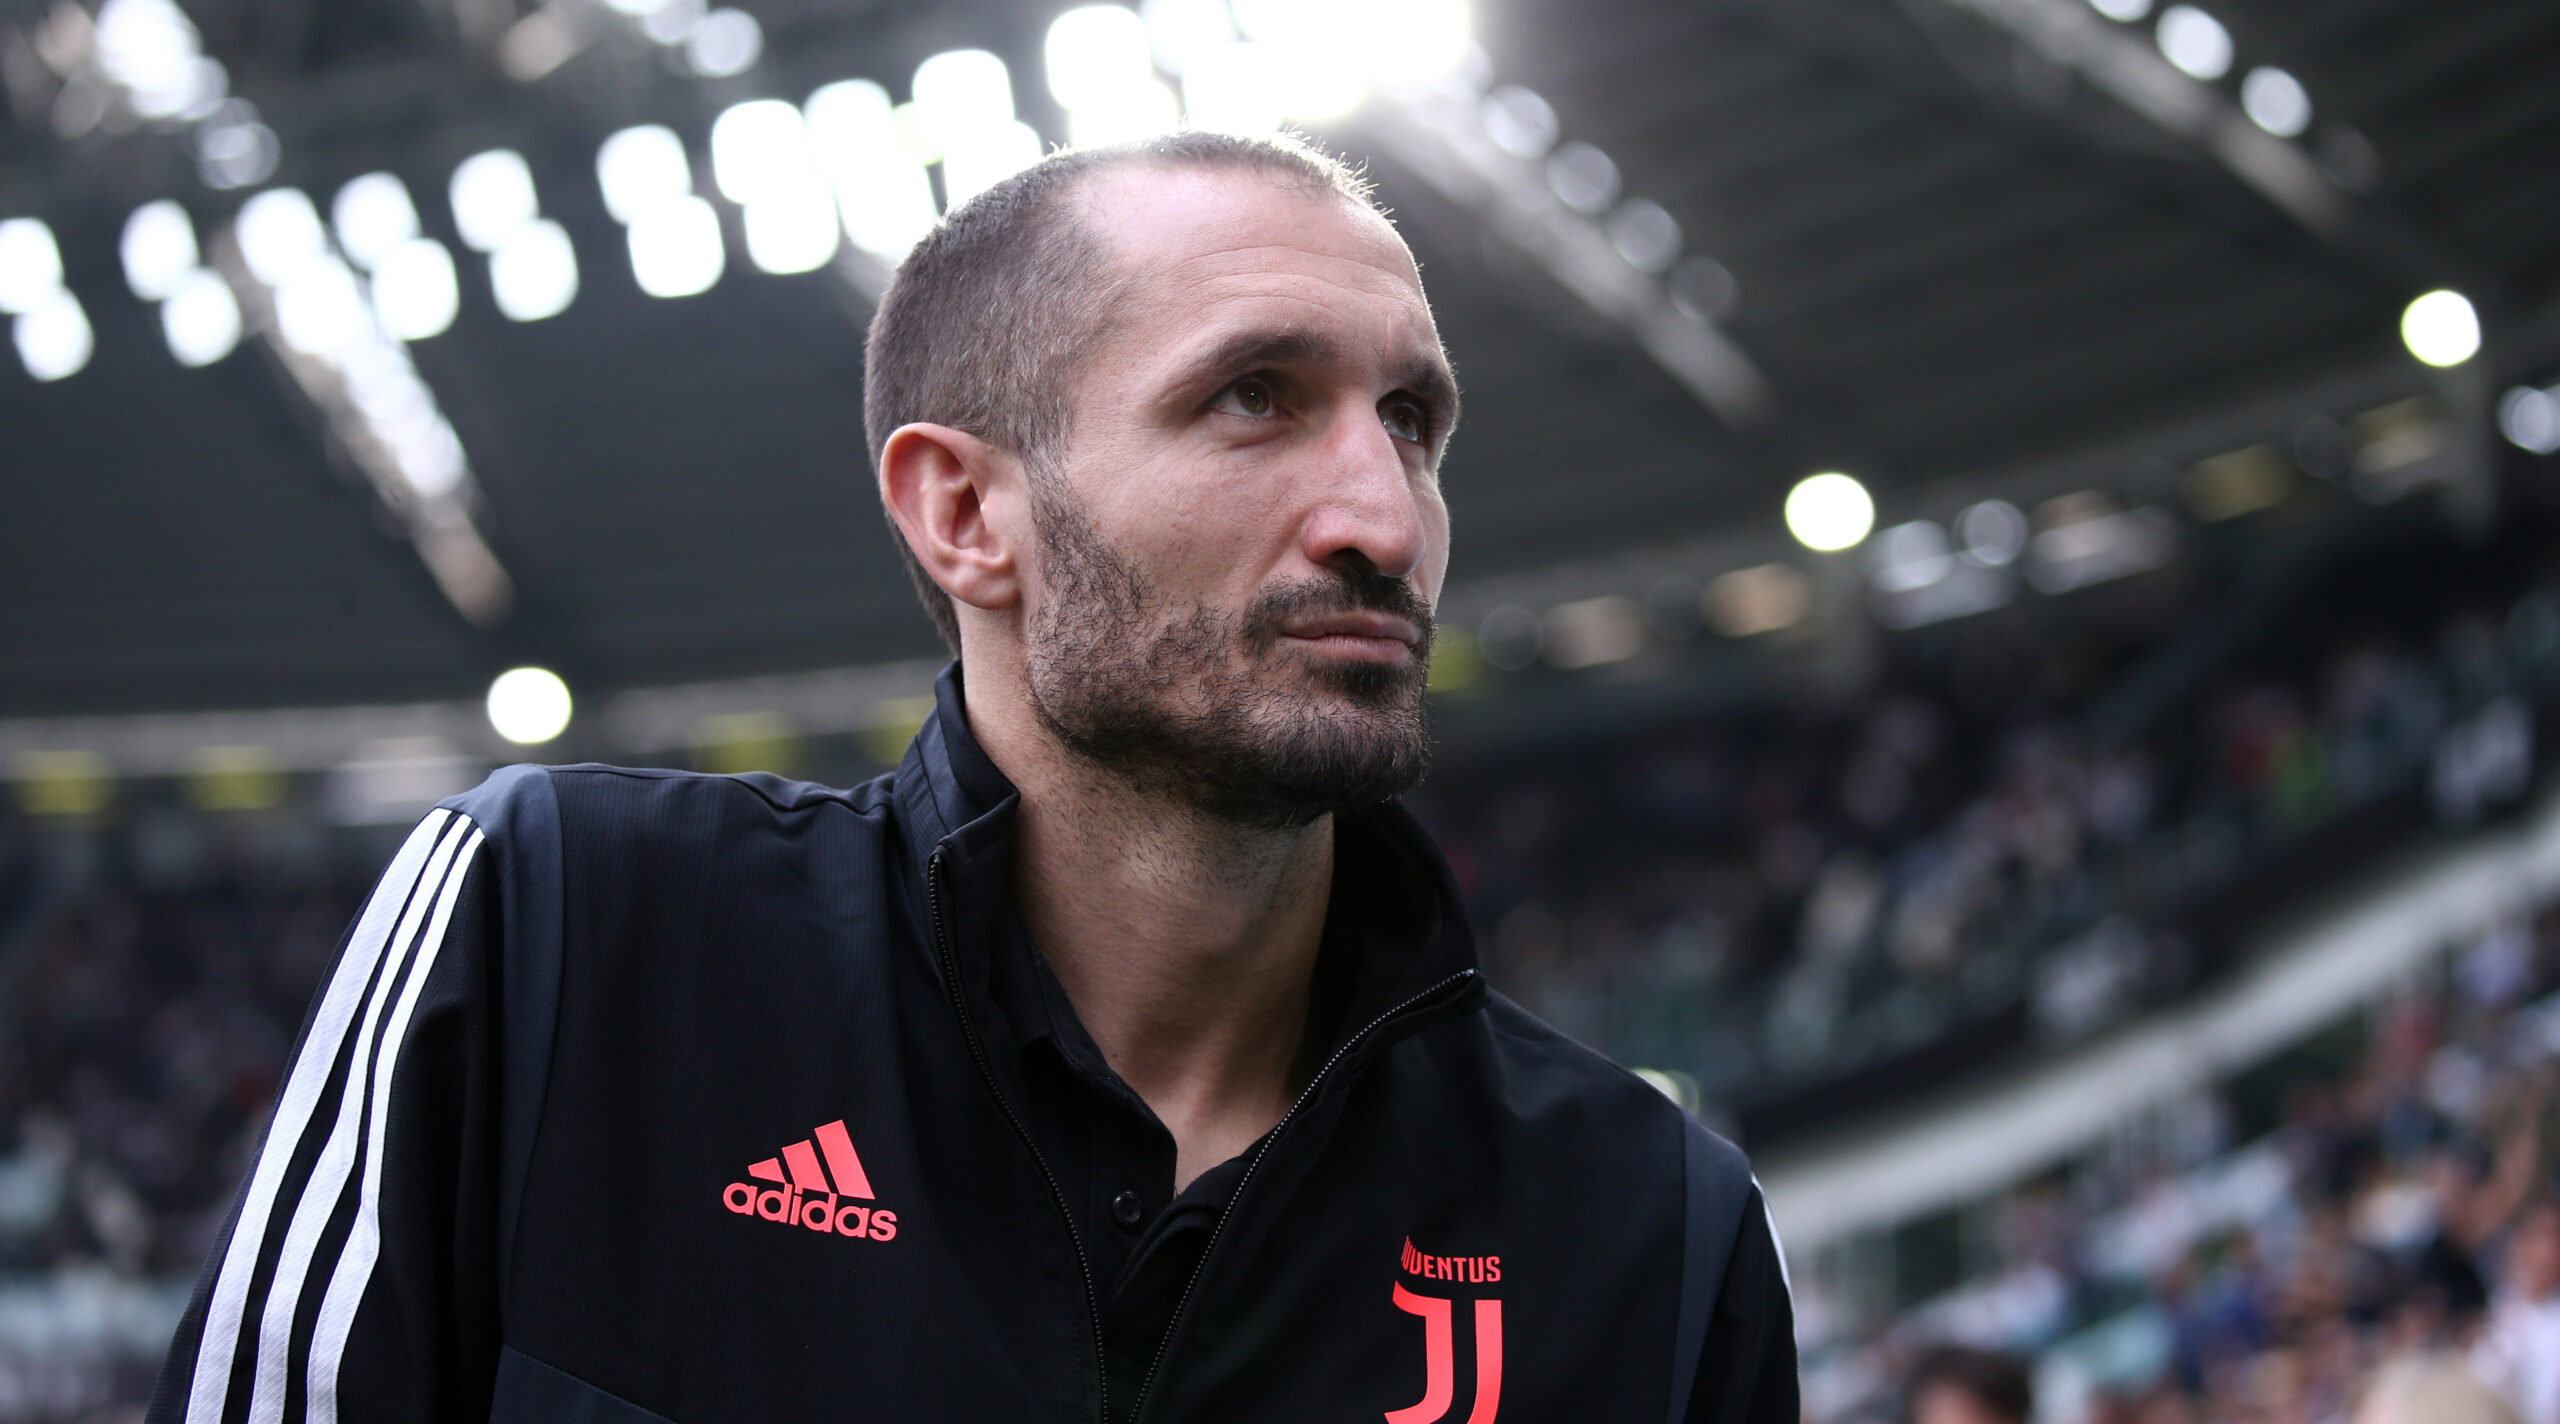 Chiellini left Juventus after 17 seasons earlier, but he still avidly follows the Bianconeri, as the club experience a decent start to the new season.